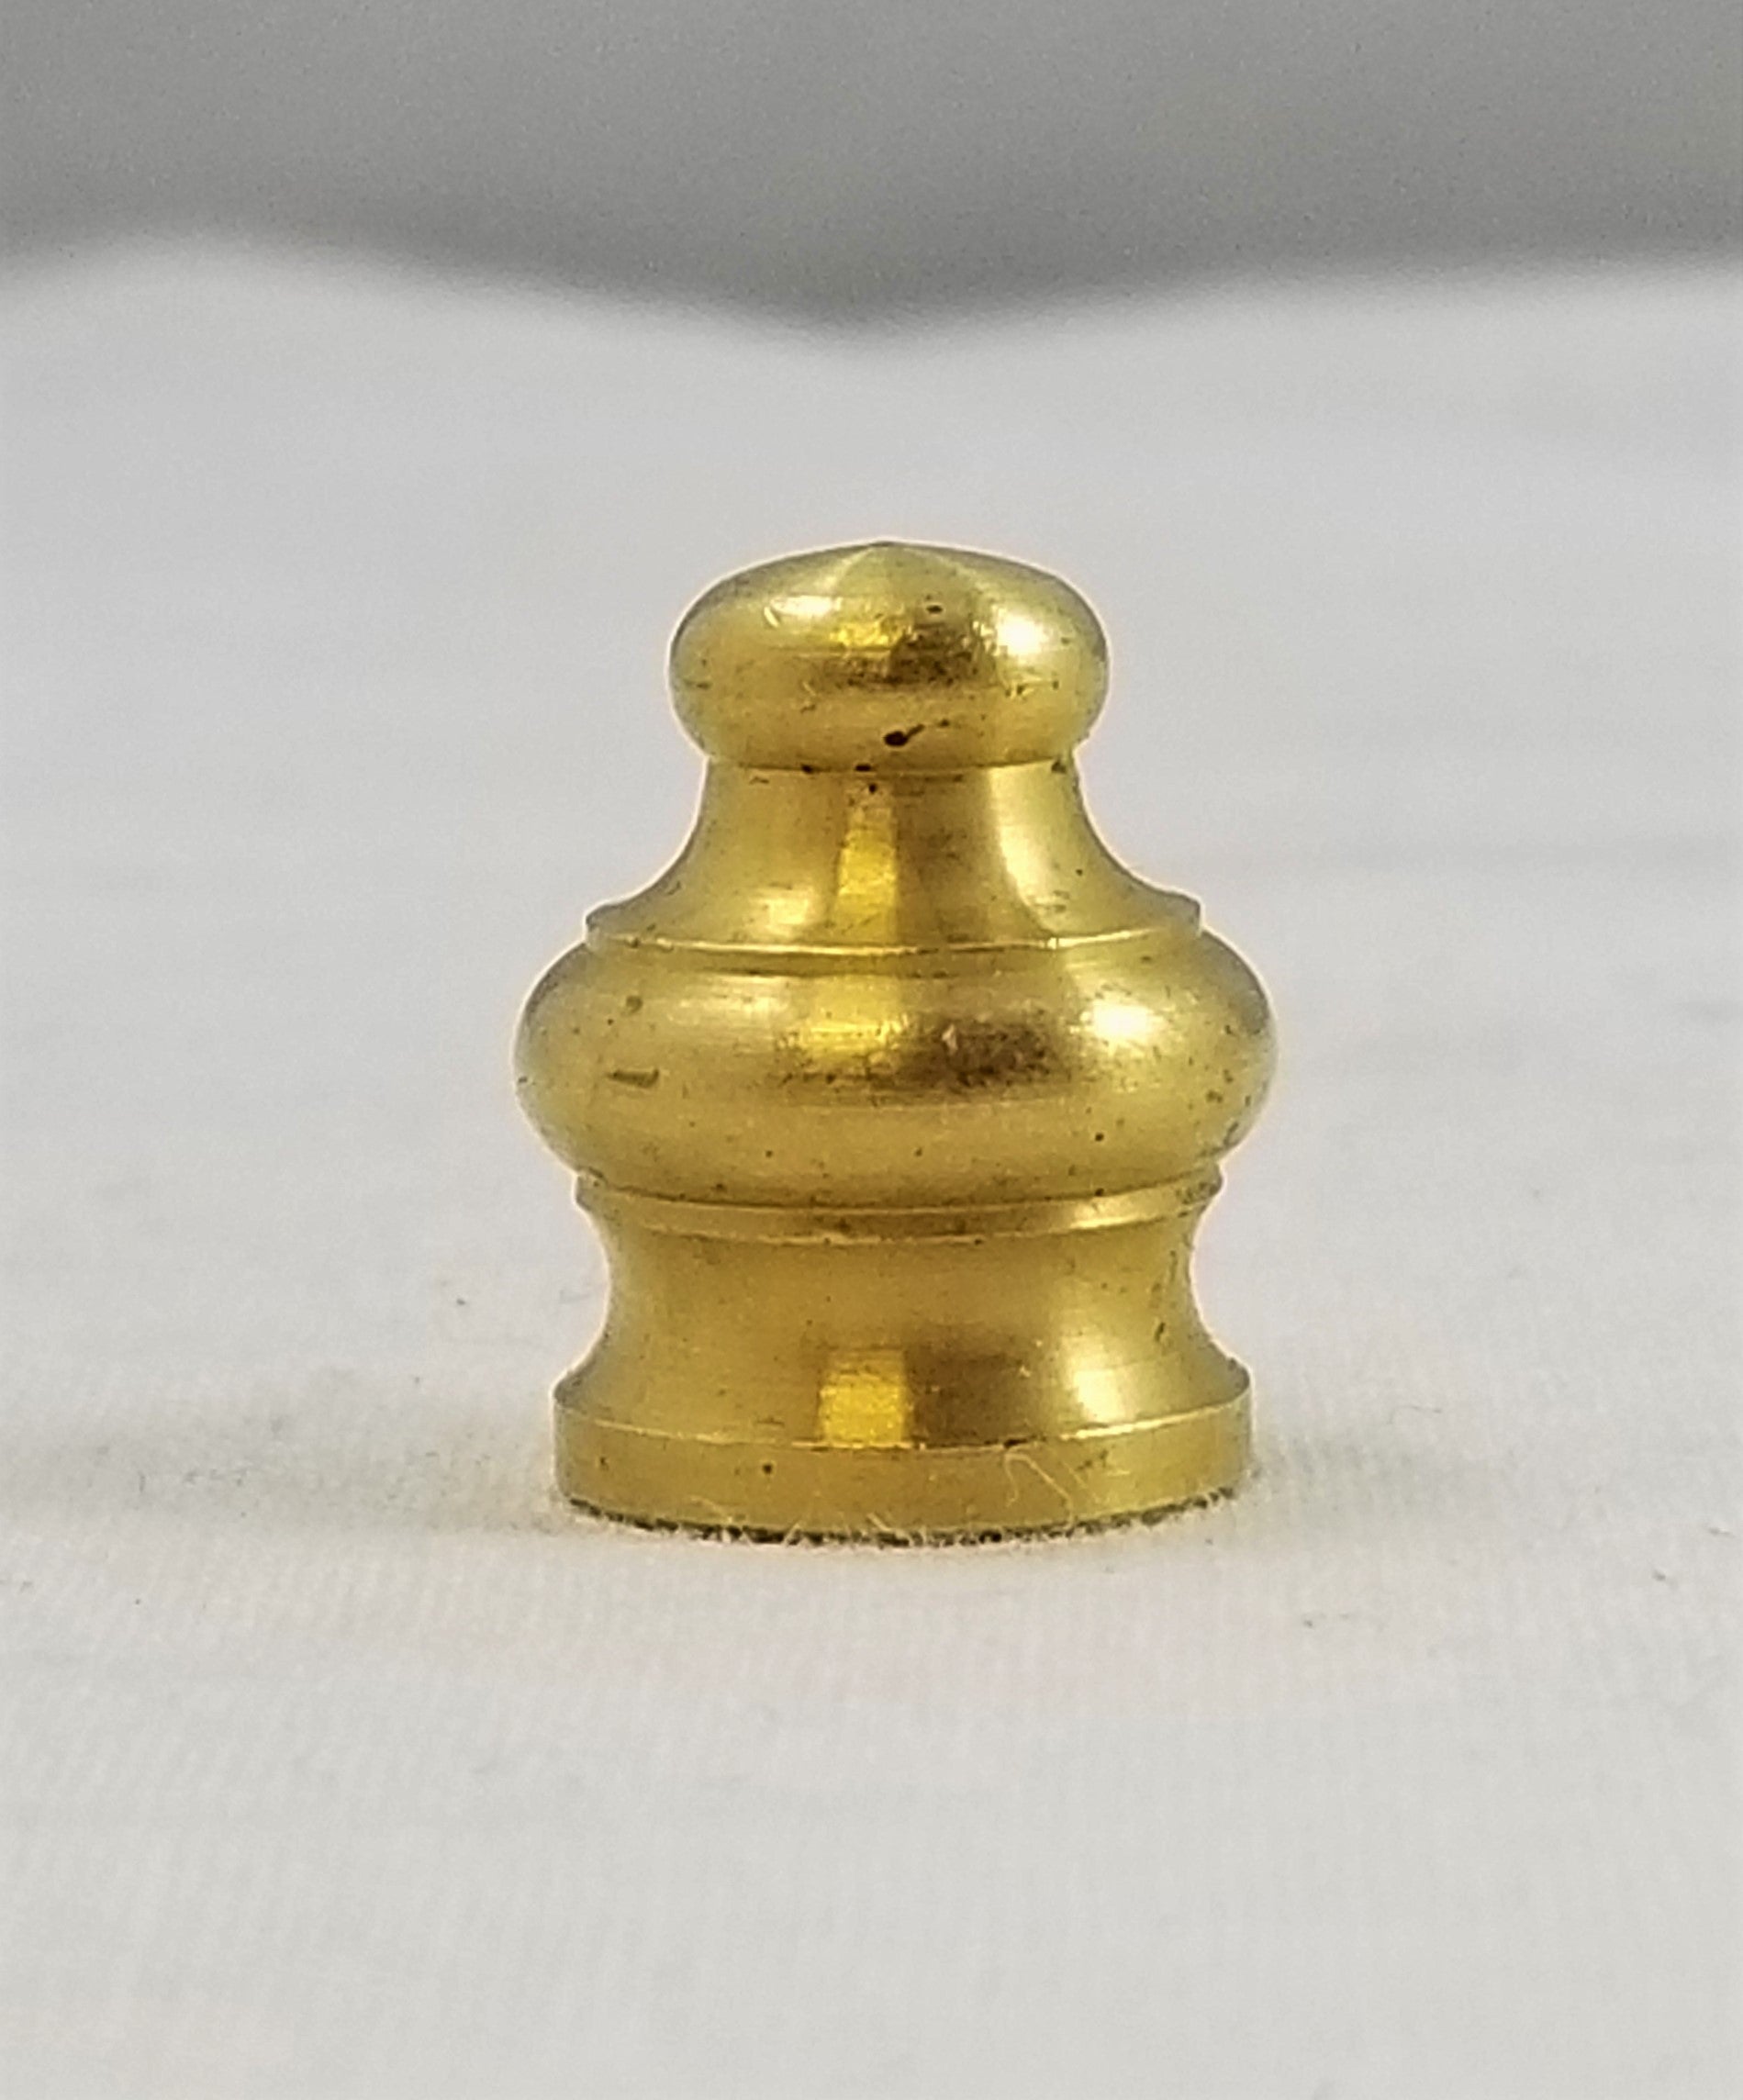 Finial - Unfinished Brass - Tapped 1/8 IPS